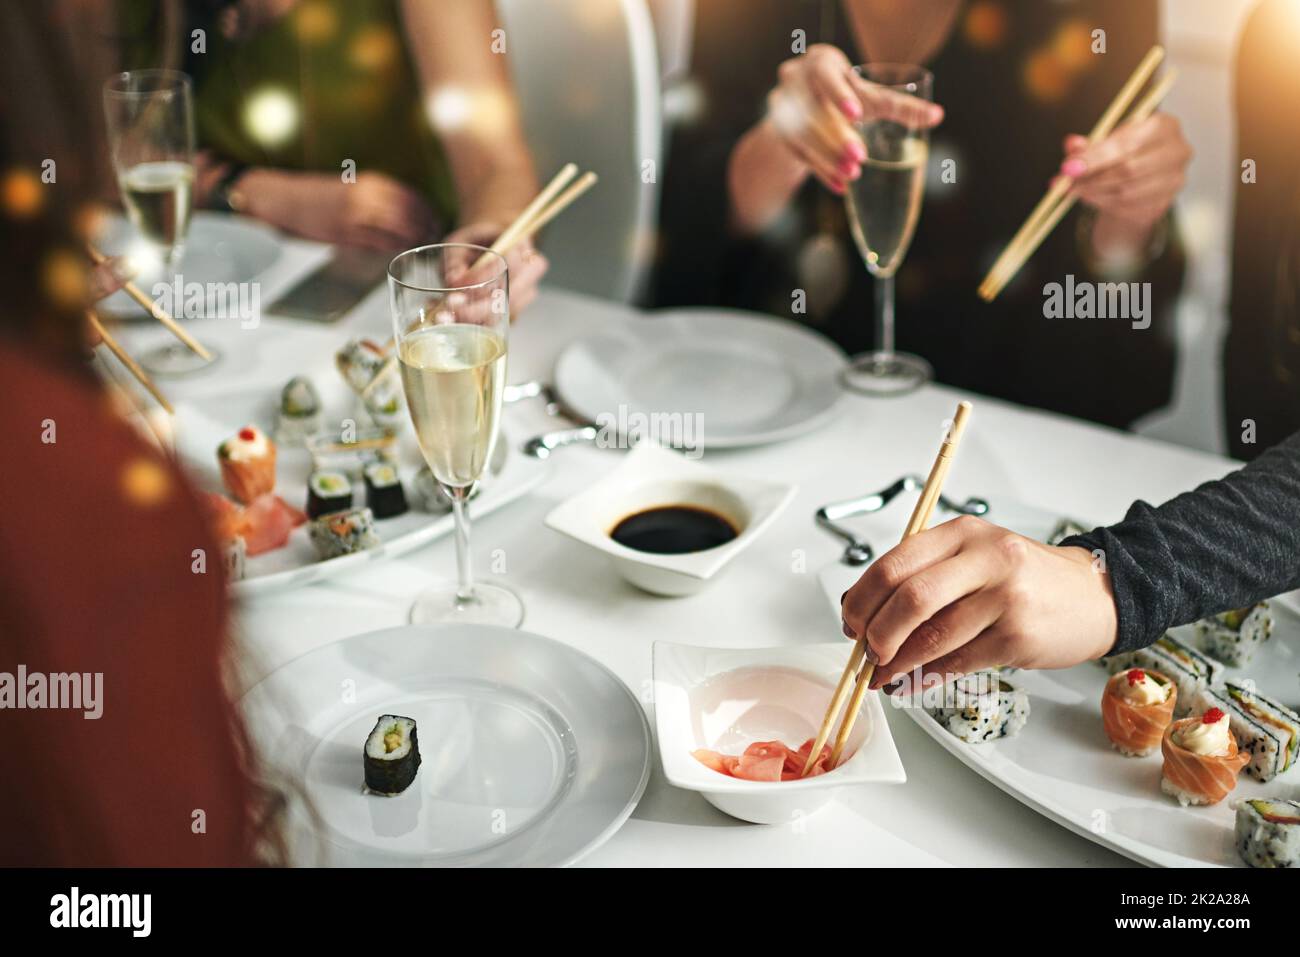 Good food, good friends, good times. Shot of friends having a dinner party at a restaurant. Stock Photo